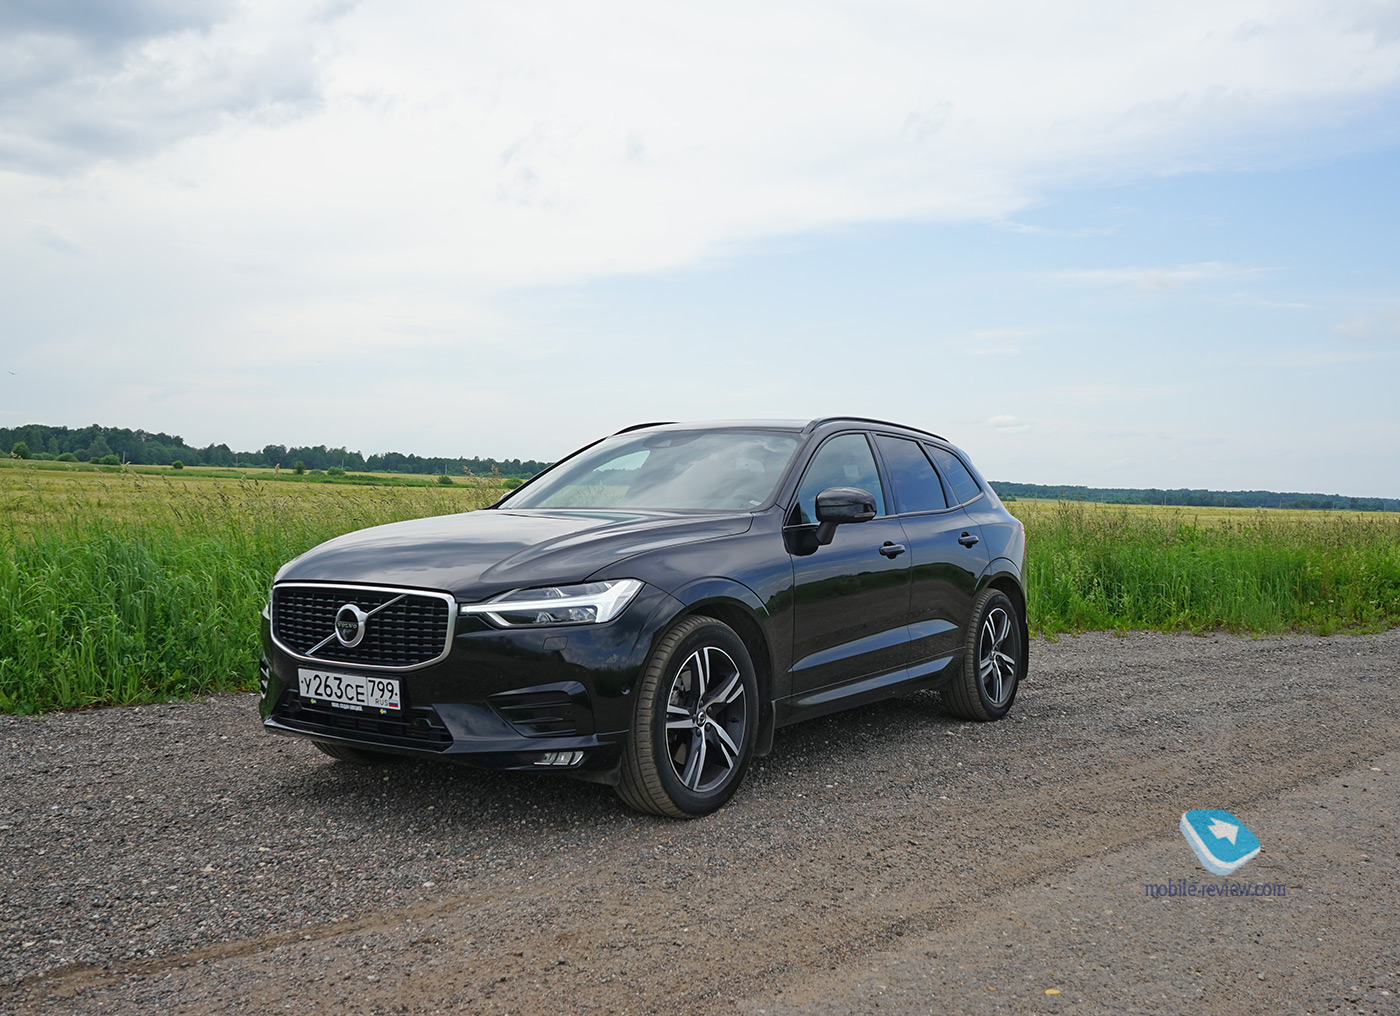 Volvo XC60 test. From Sweden with love